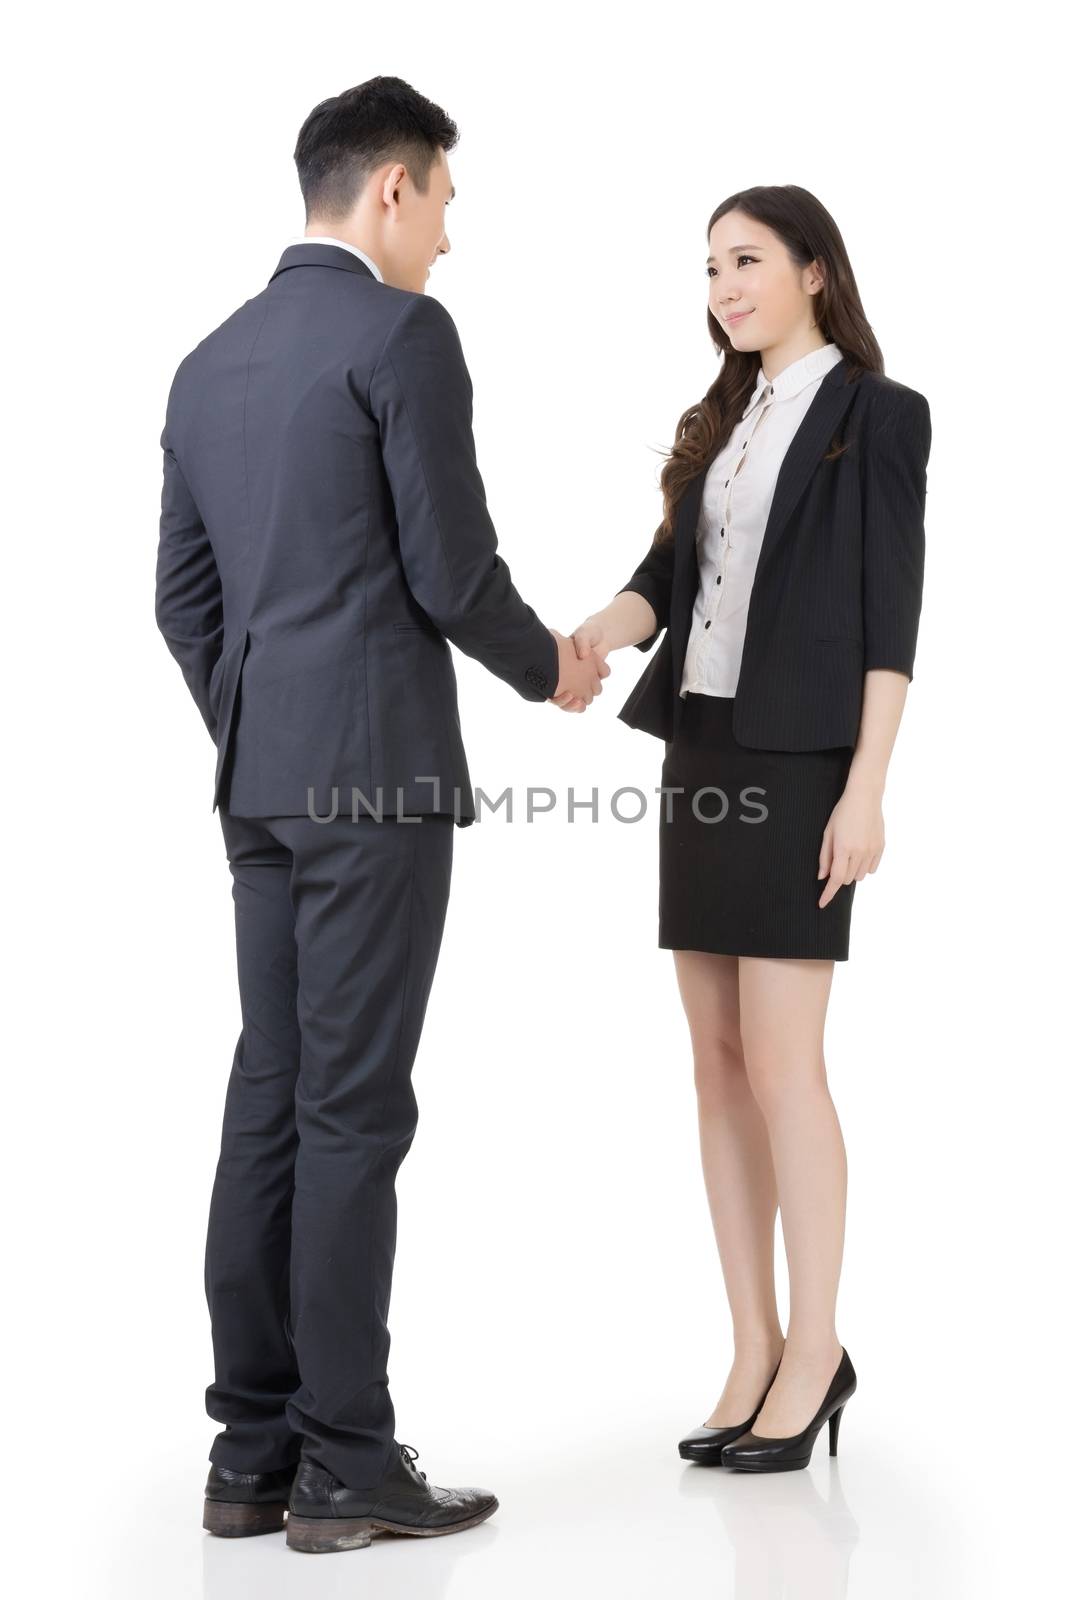 Business woman and man shake hands, full length portrait isolated on white background.